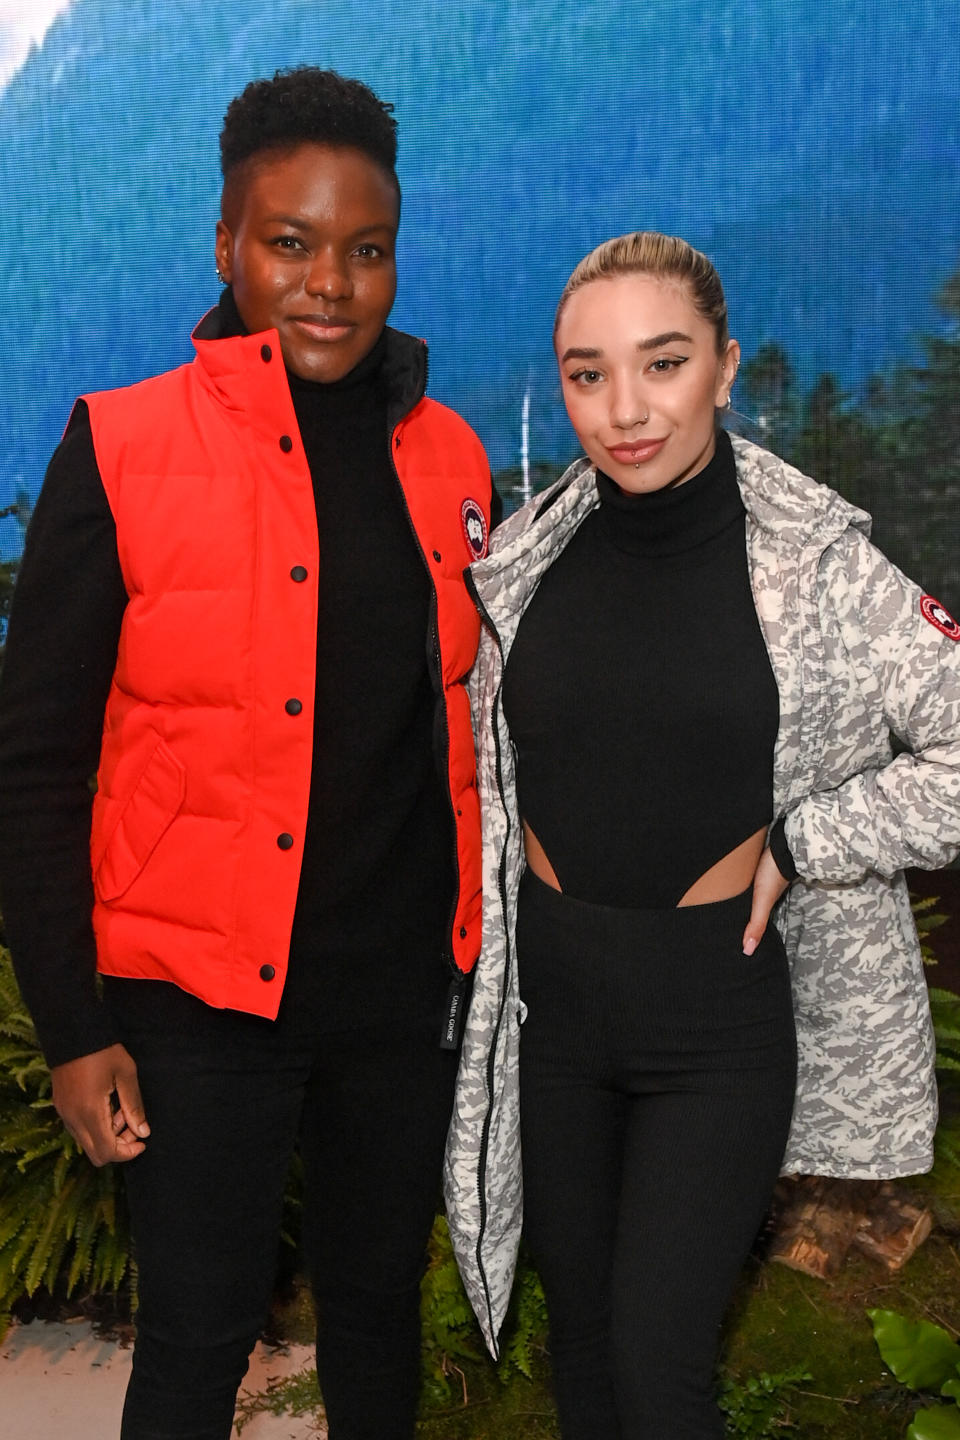 LONDON, ENGLAND - NOVEMBER 10:   Nicola Adams and Ella Baig attend the launch of Canada Goose Footwear at Victoria House on November 10, 2021 in London, England. (Photo by David M. Benett/Dave Benett/Getty Images for Canada Goose)